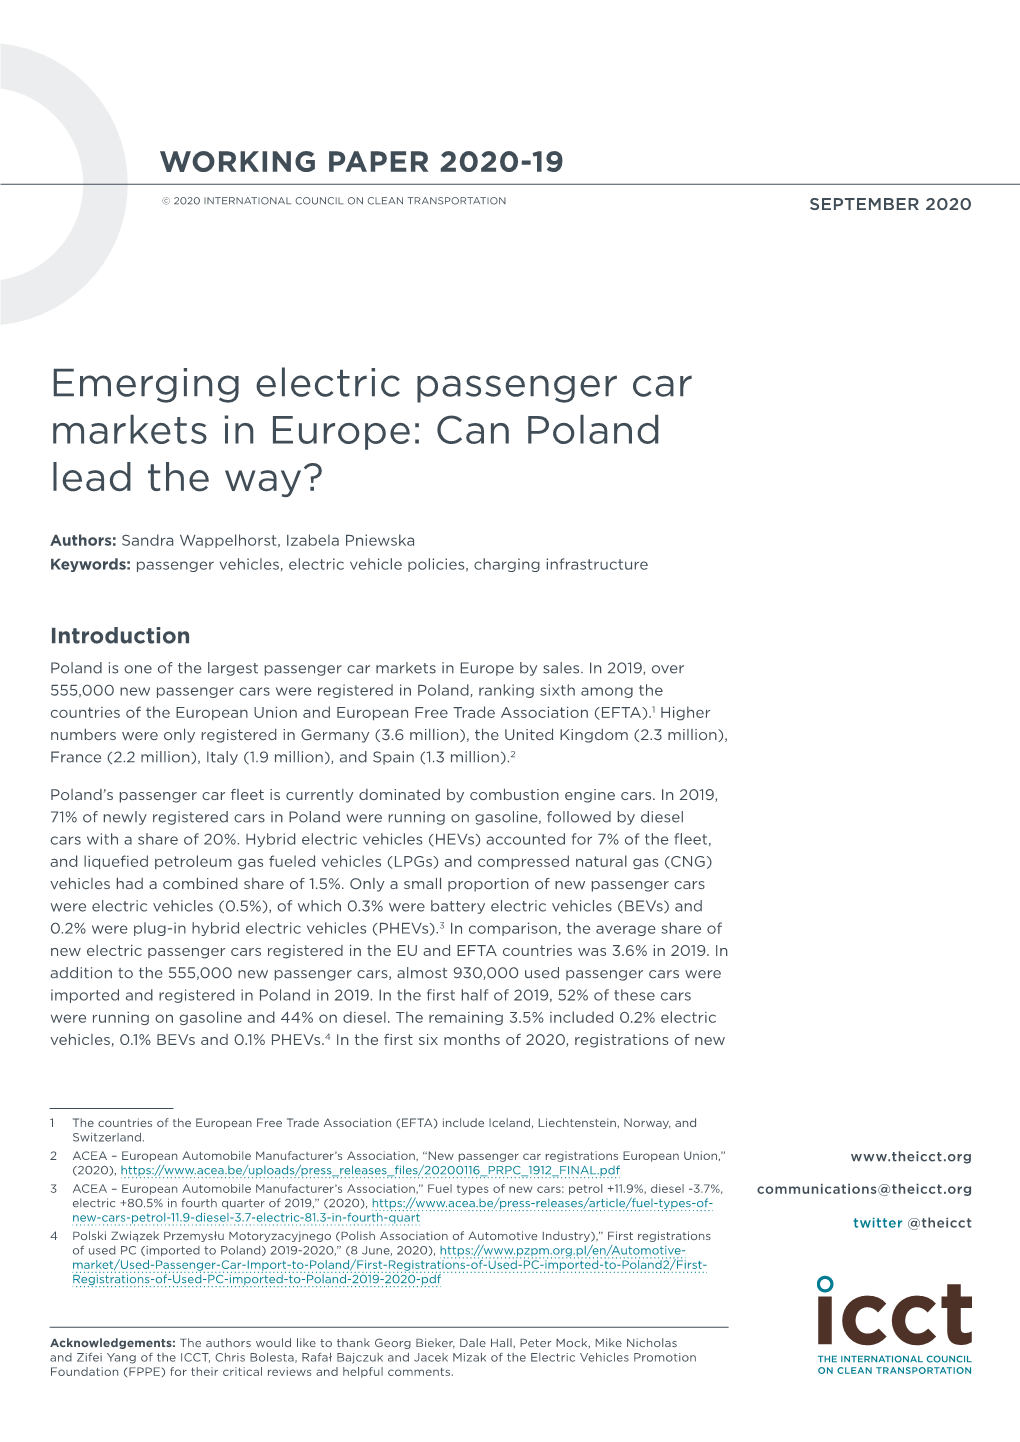 Emerging Electric Passenger Car Markets in Europe: Can Poland Lead the Way?